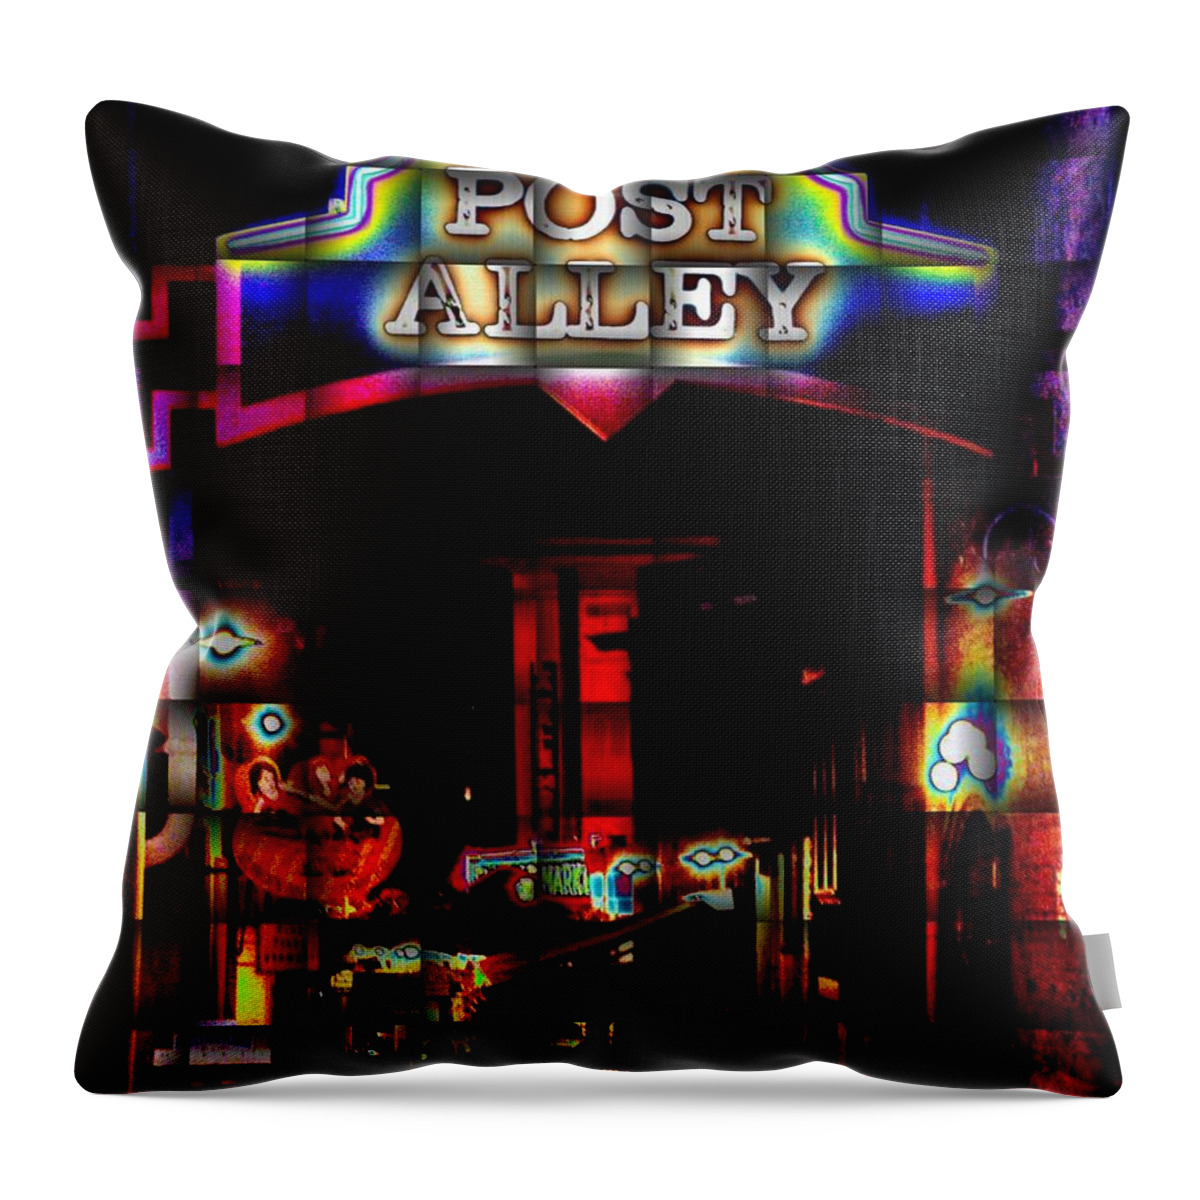 Seattle Throw Pillow featuring the photograph Post Alley Weave by Tim Allen